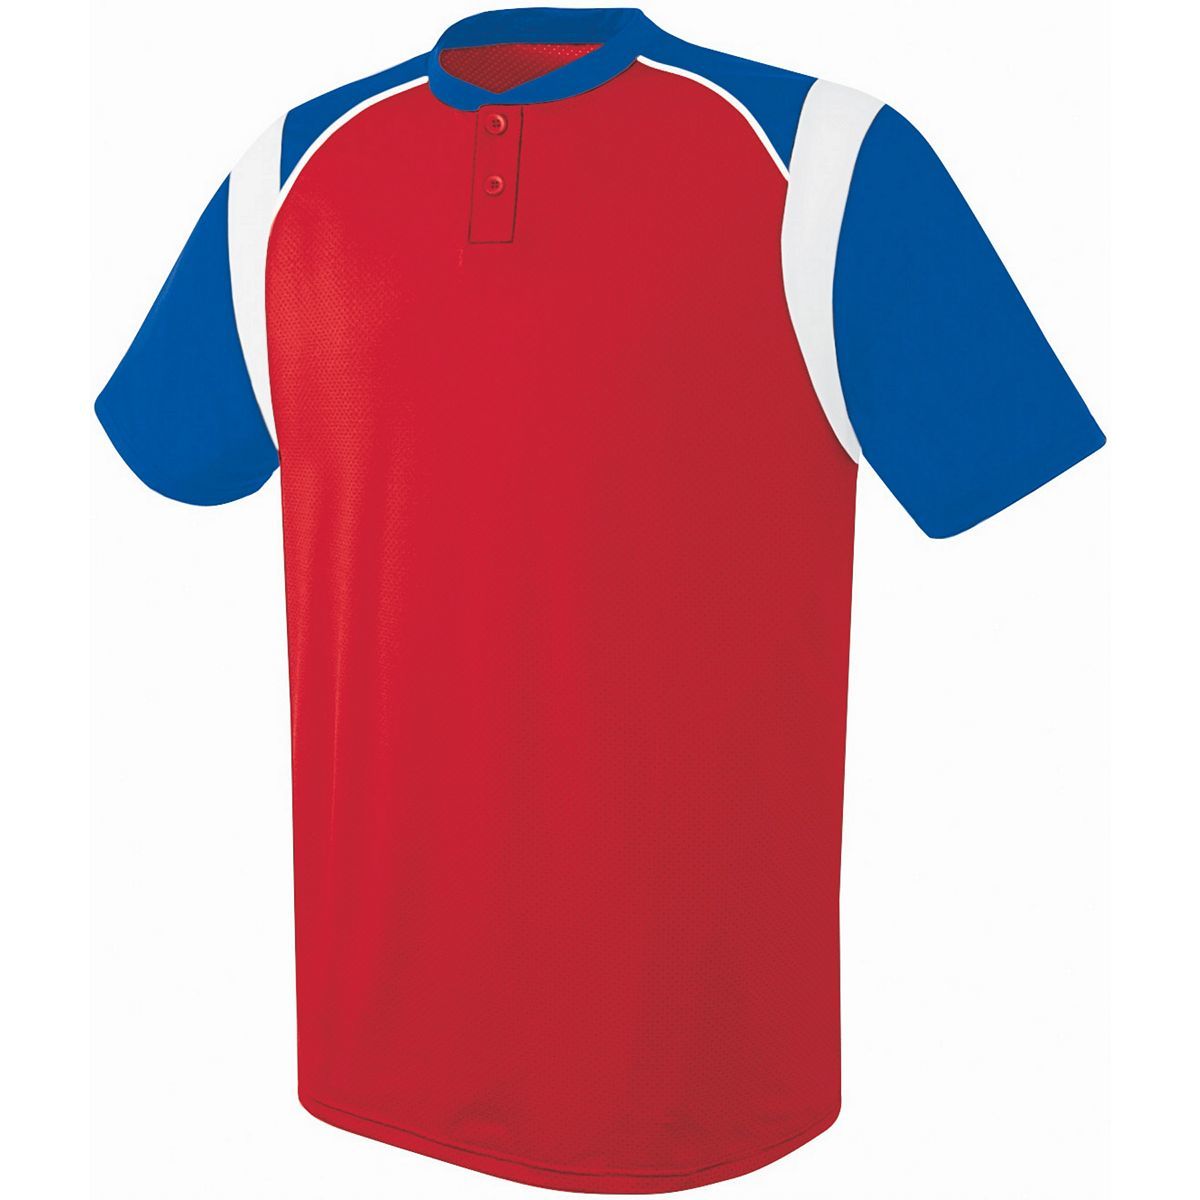 Augusta Sportswear Wildcard Two-Button Jersey in Scarlet/Royal/White  -Part of the Adult, Adult-Jersey, Augusta-Products, Baseball, Shirts, All-Sports, All-Sports-1 product lines at KanaleyCreations.com